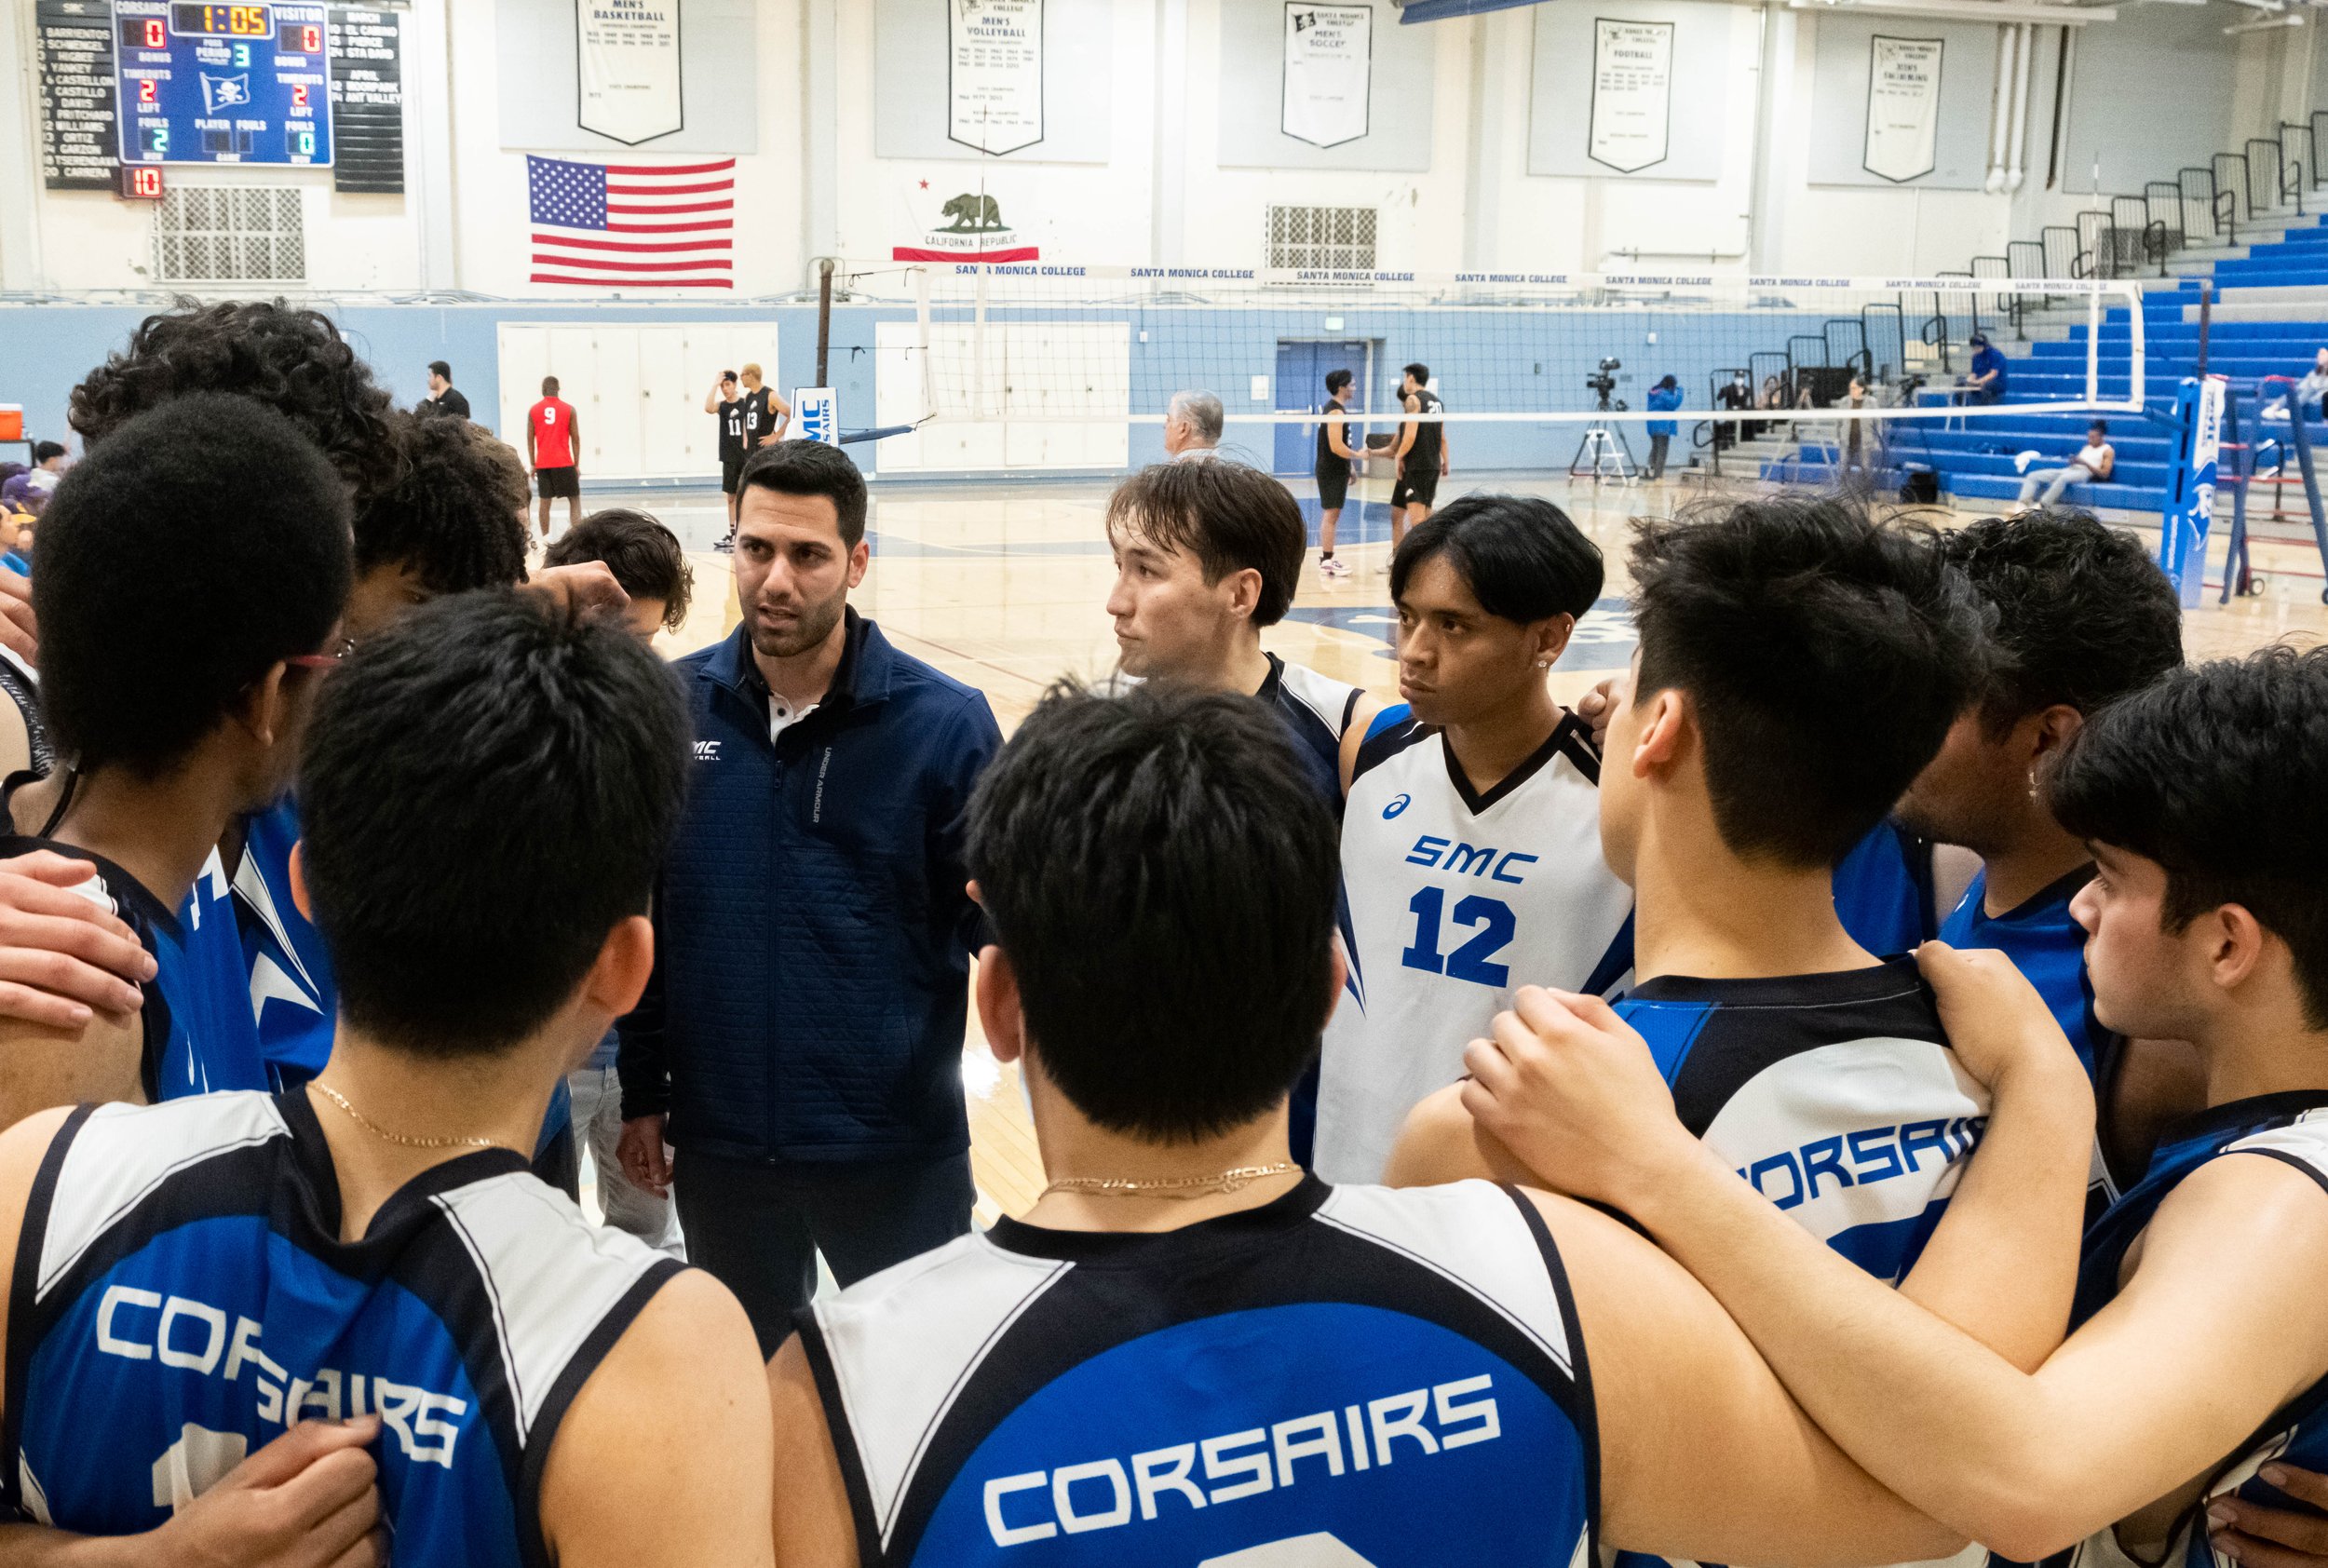  Santa Monica College(SMC) Corsairs men's volleyball team huddled up with head coach Liran Zamir before the start of the third period against the Brahma Bulls from L.A. Pierce College on Wed. March 15, 2023 at the SMC Pavillion Gym in Santa Monica, C